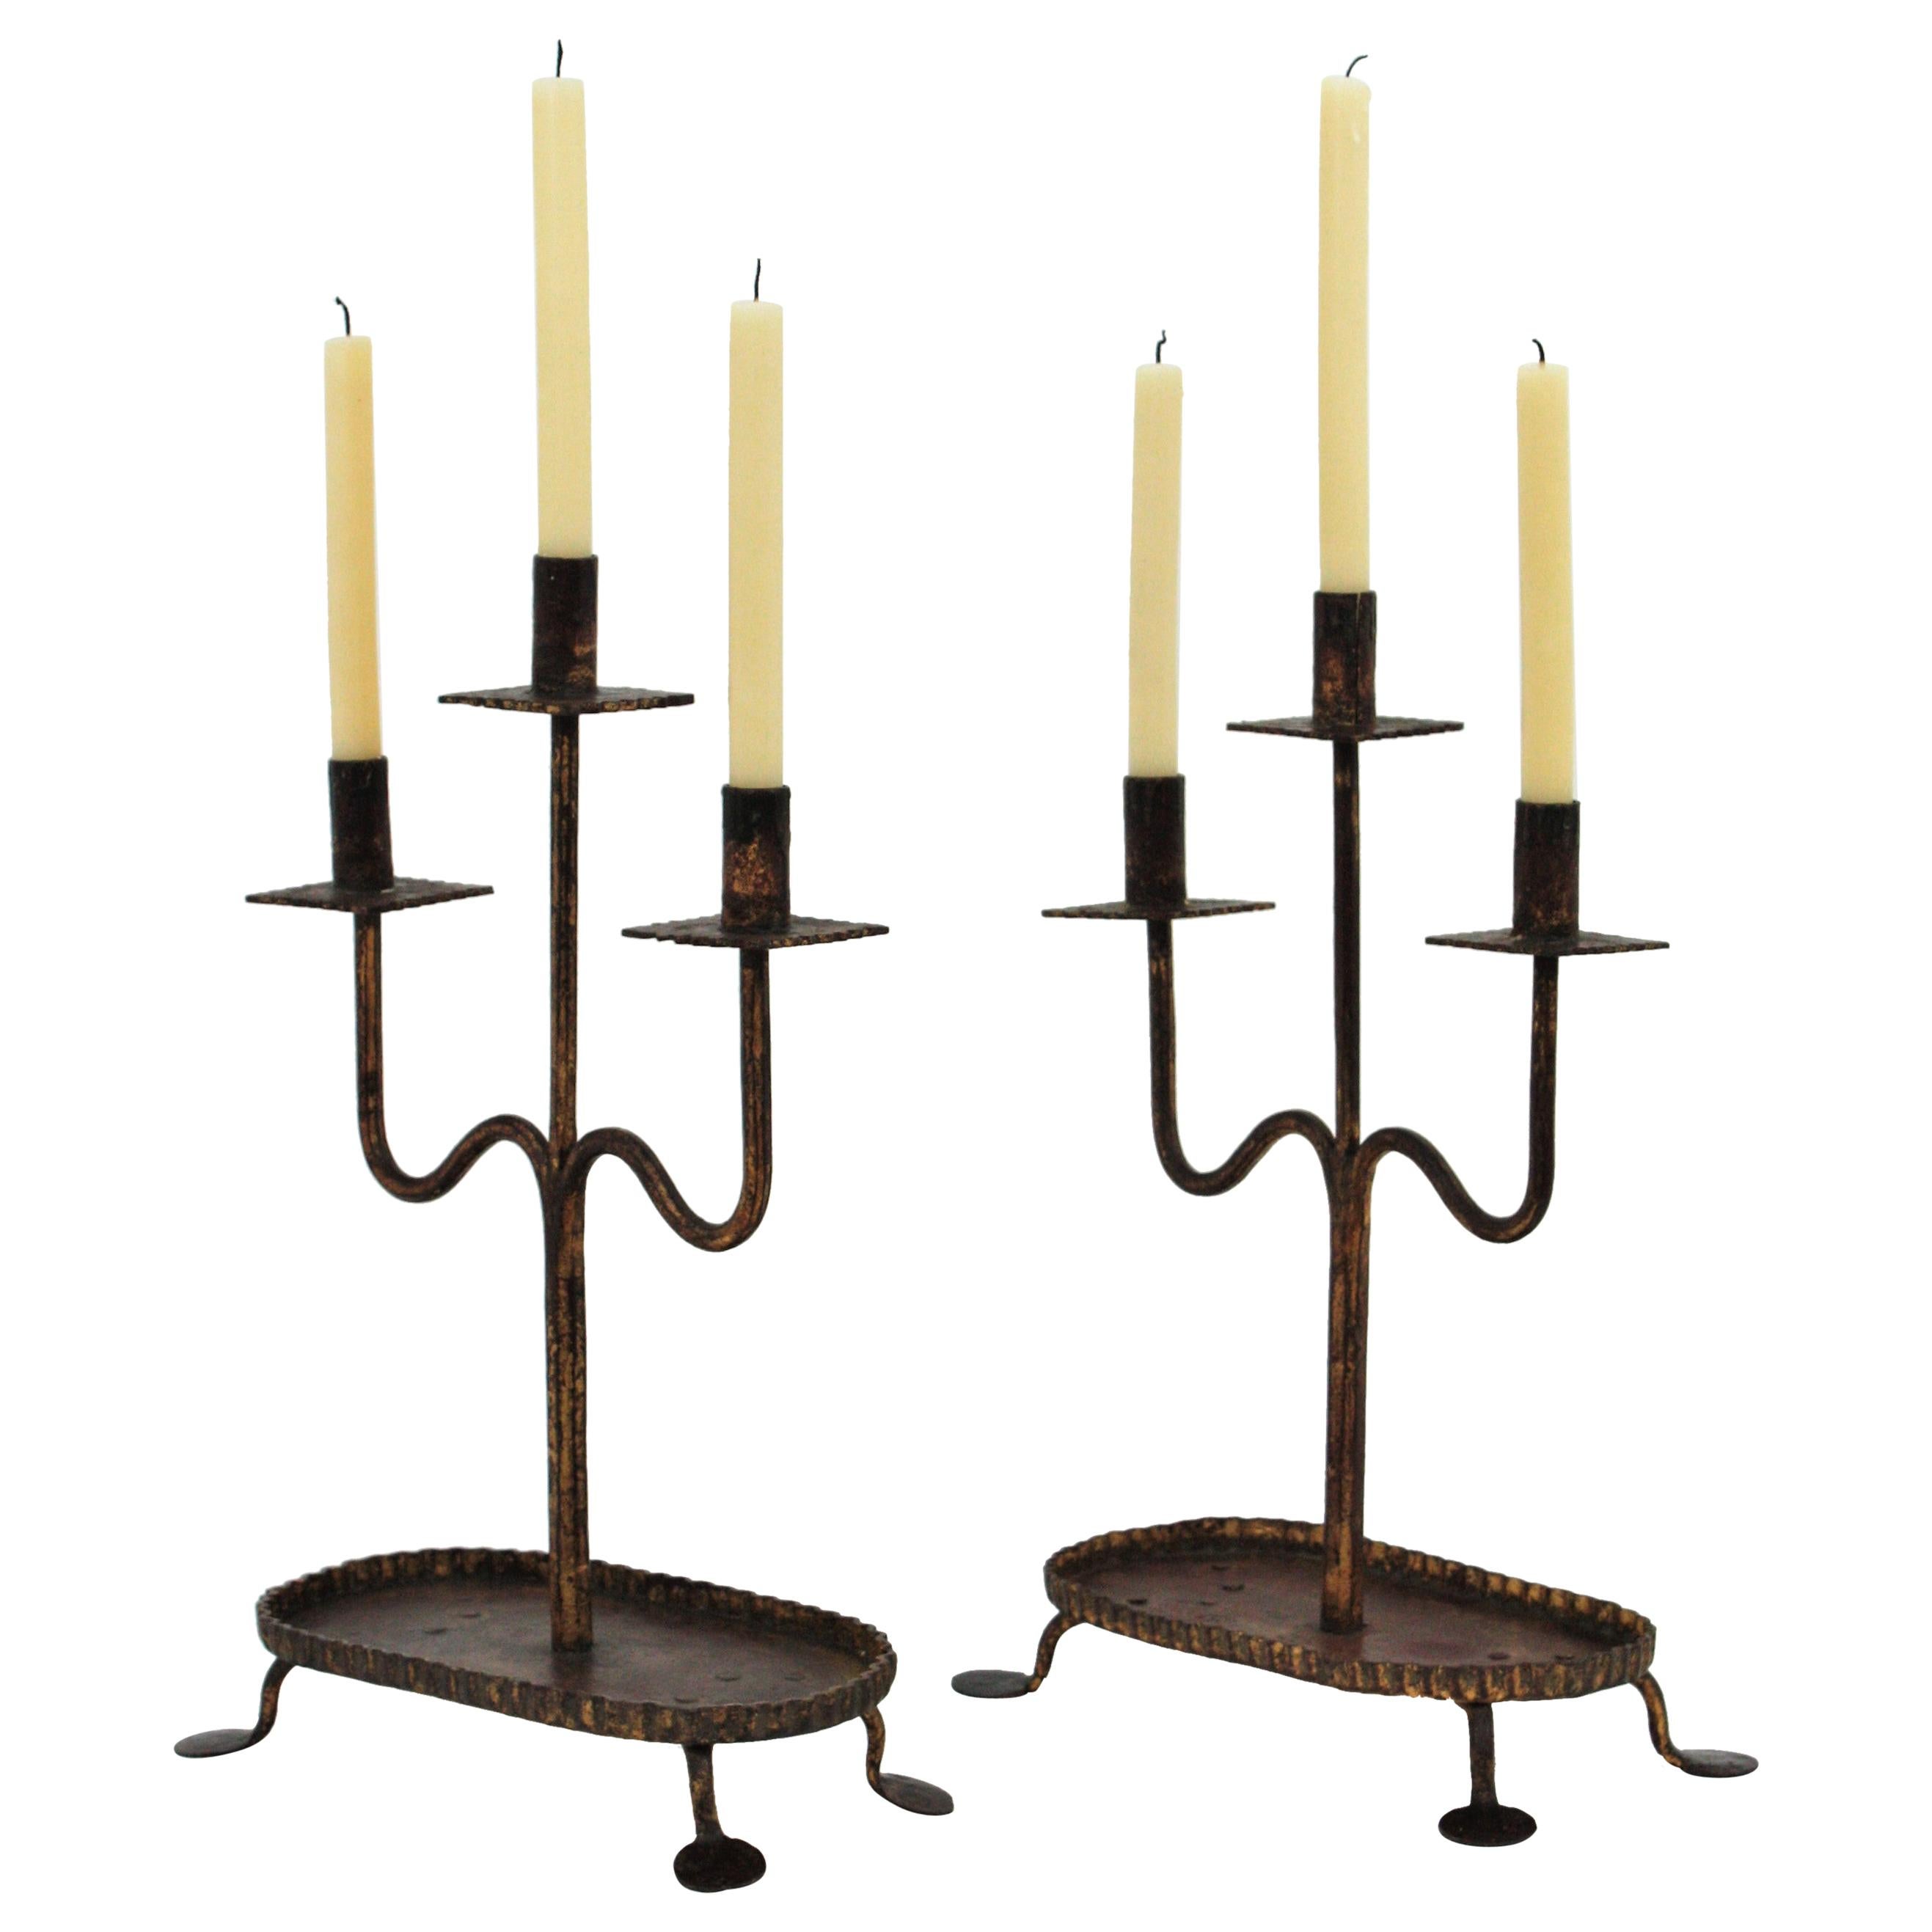 Pair of Spanish Gothic Revival Gilt Wrought Iron Candelabra / Candleholders